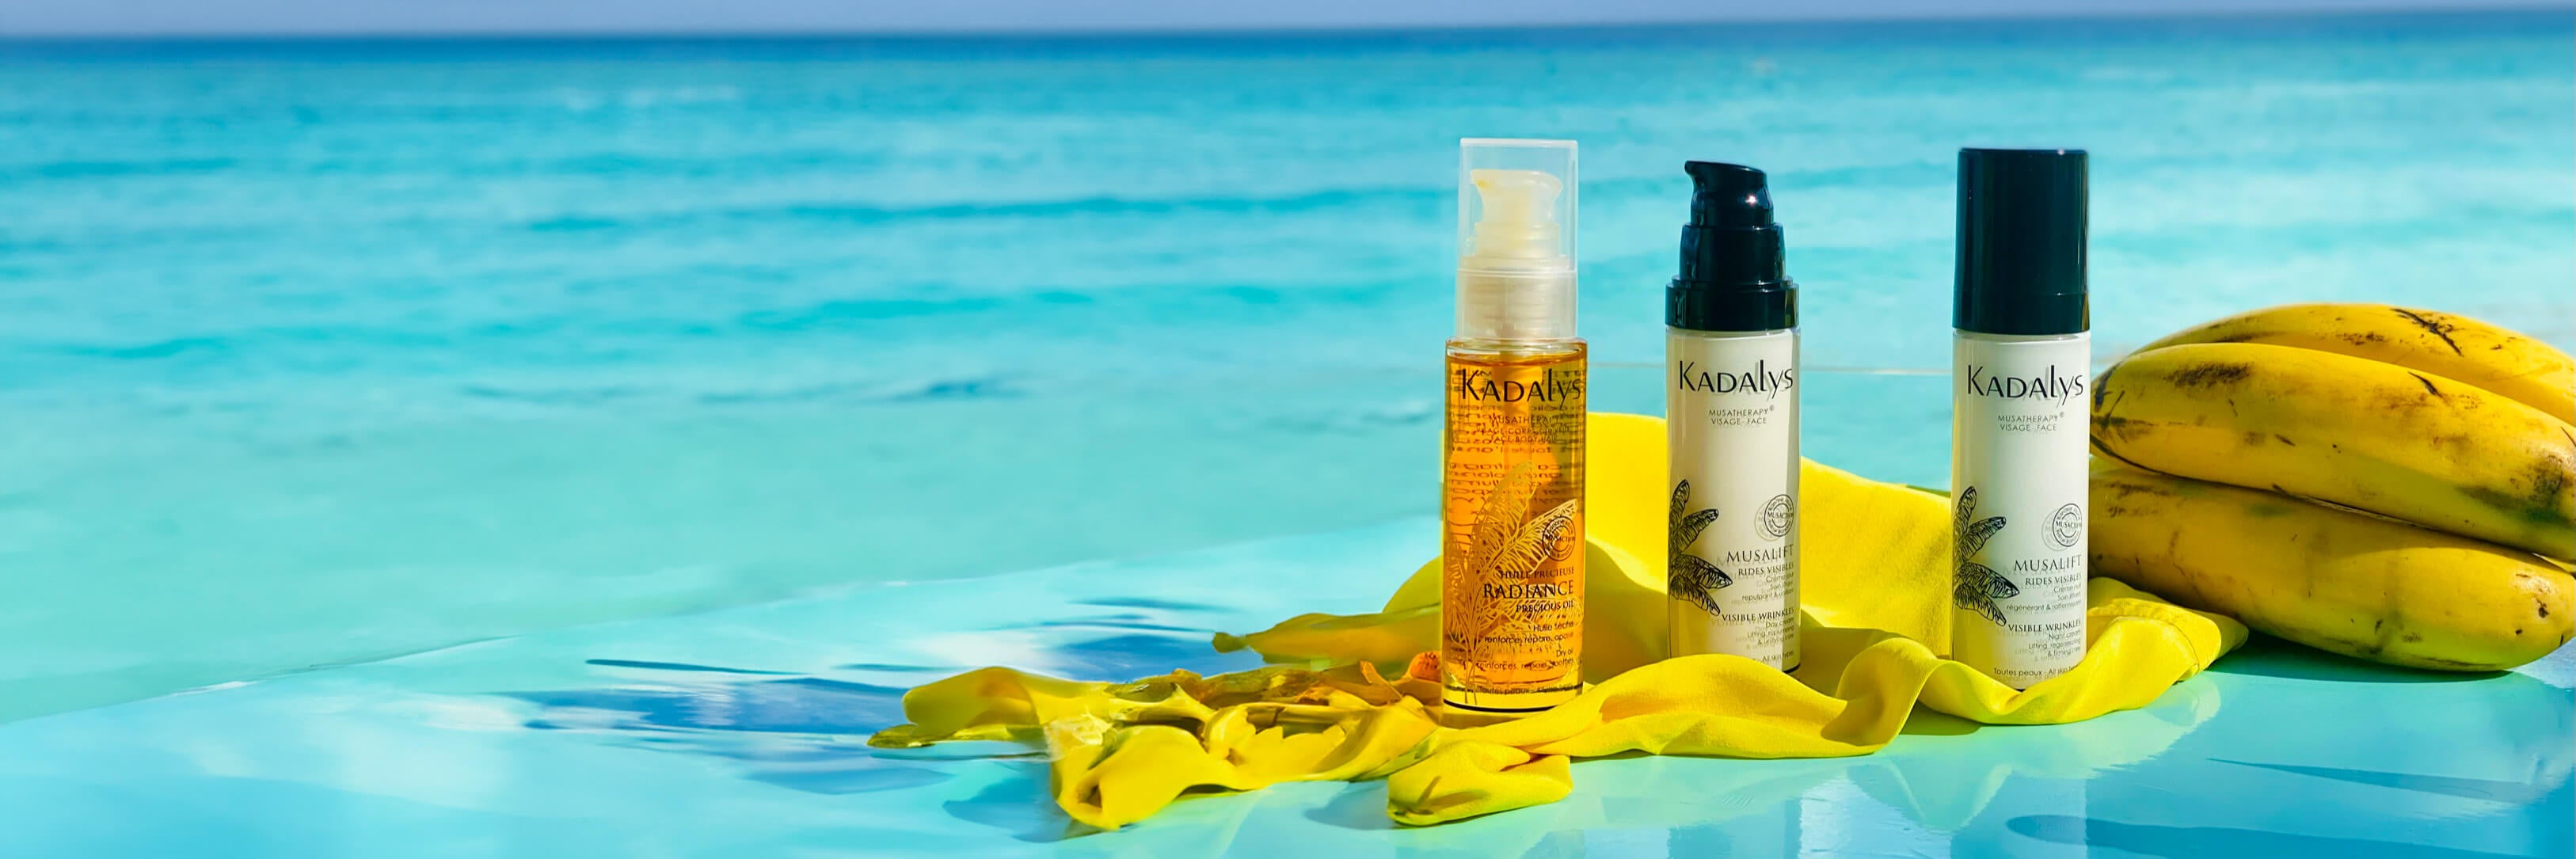 Image of Kadalys products next to banana on a yellow beach towel with blue Caribbean water in the background | Kadalys effective natural skincare products made from bananas